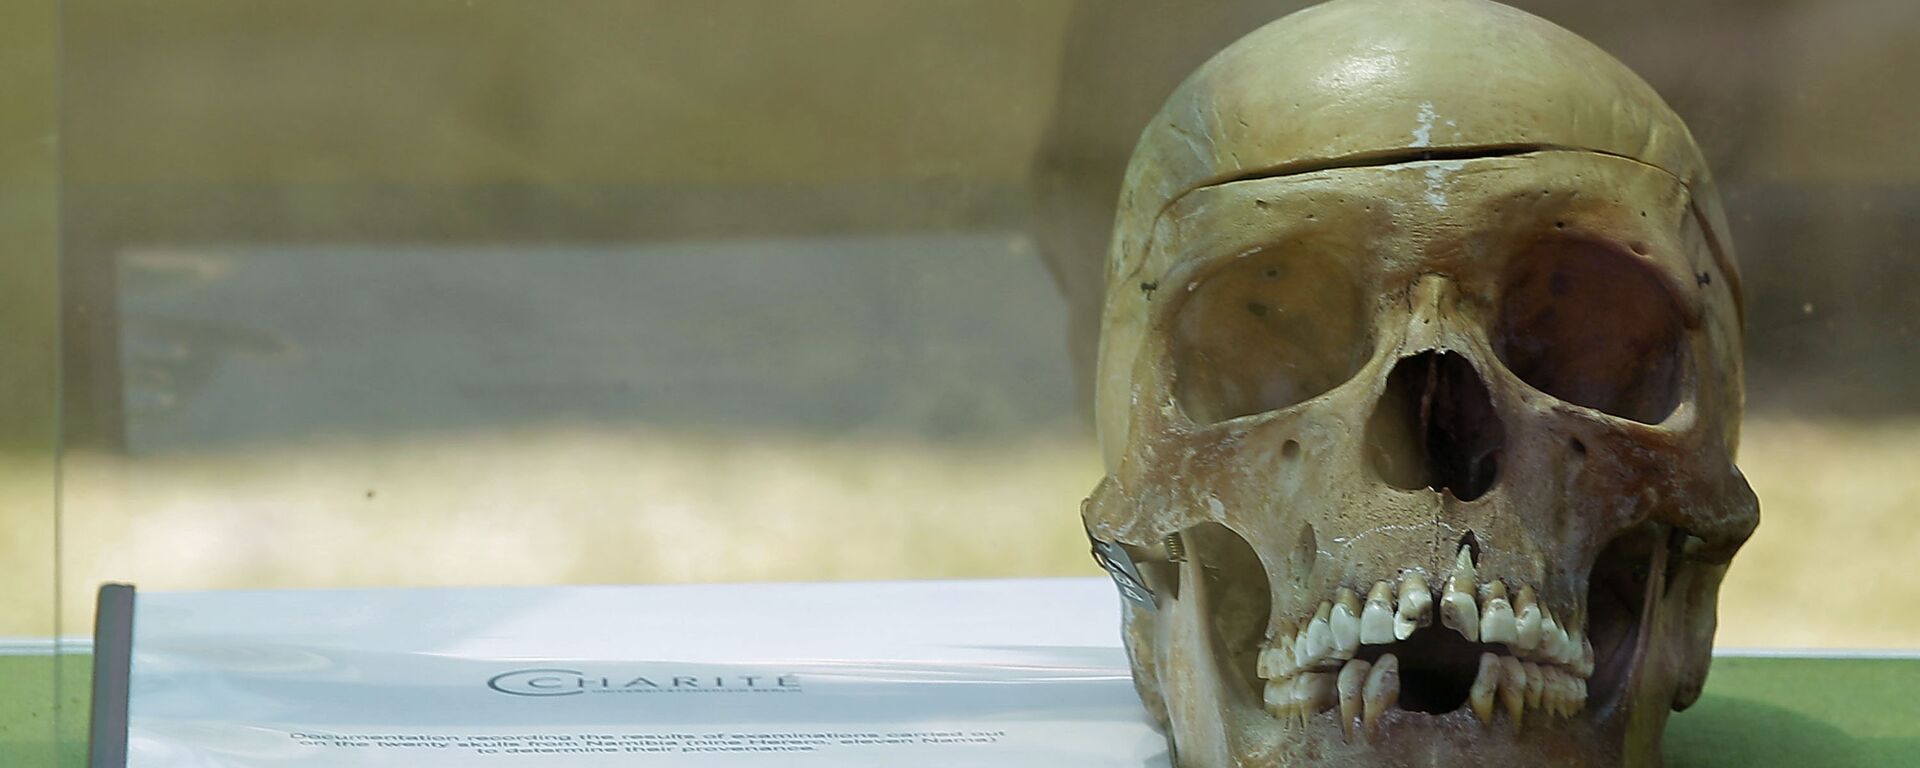 A skull from Germany on display in the city of Windhoek, Namibia, Tuesday, Oct 4, 2011. Hundreds of Namibians welcomed home the skulls of ancestors taken to Germany for racist experiments more than a century ago. The skulls are testimony to the horrors of colonialism and German cruelty against our people, Prime Minister Nahas Angula said at an airport ceremony, The Namibian nation accepts these mortal remains as a symbolic closure of a tragic chapter. - Sputnik International, 1920, 28.05.2021